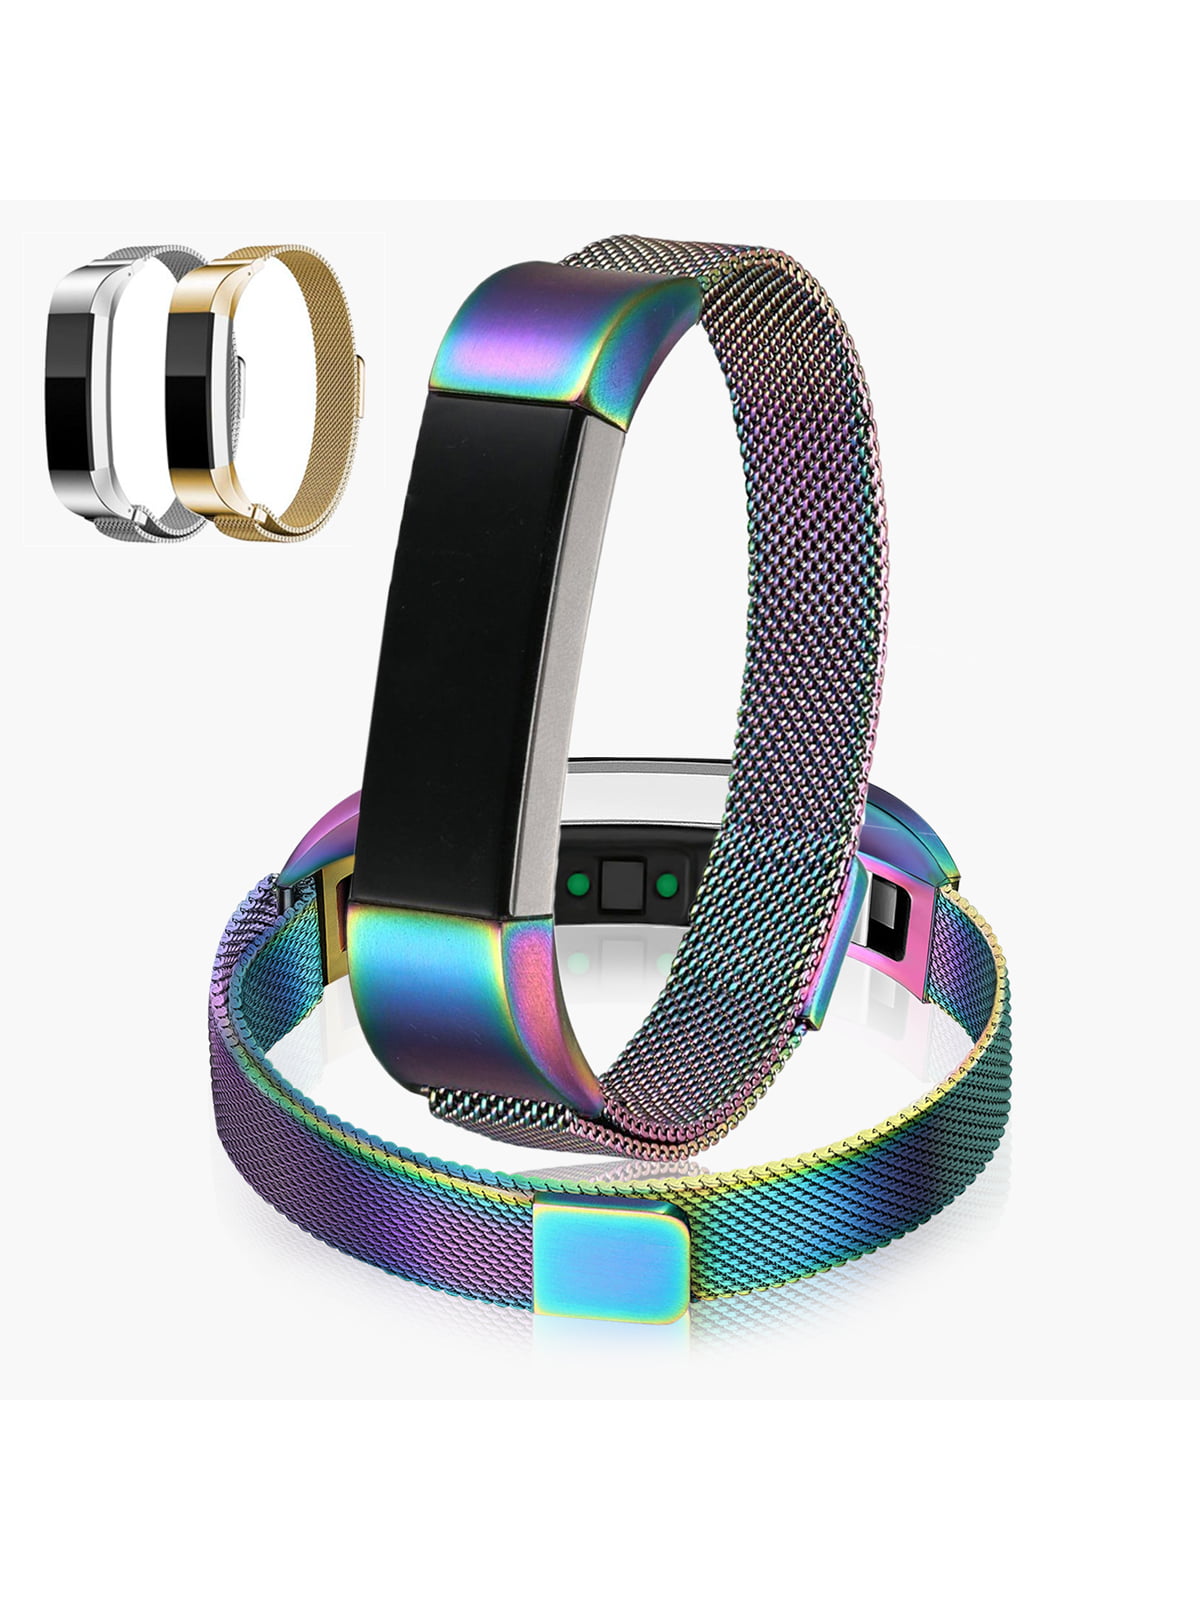 NEW Fitbit Alta HR ACE Steel Replacement Band Strap Magnetic Wristband USA 